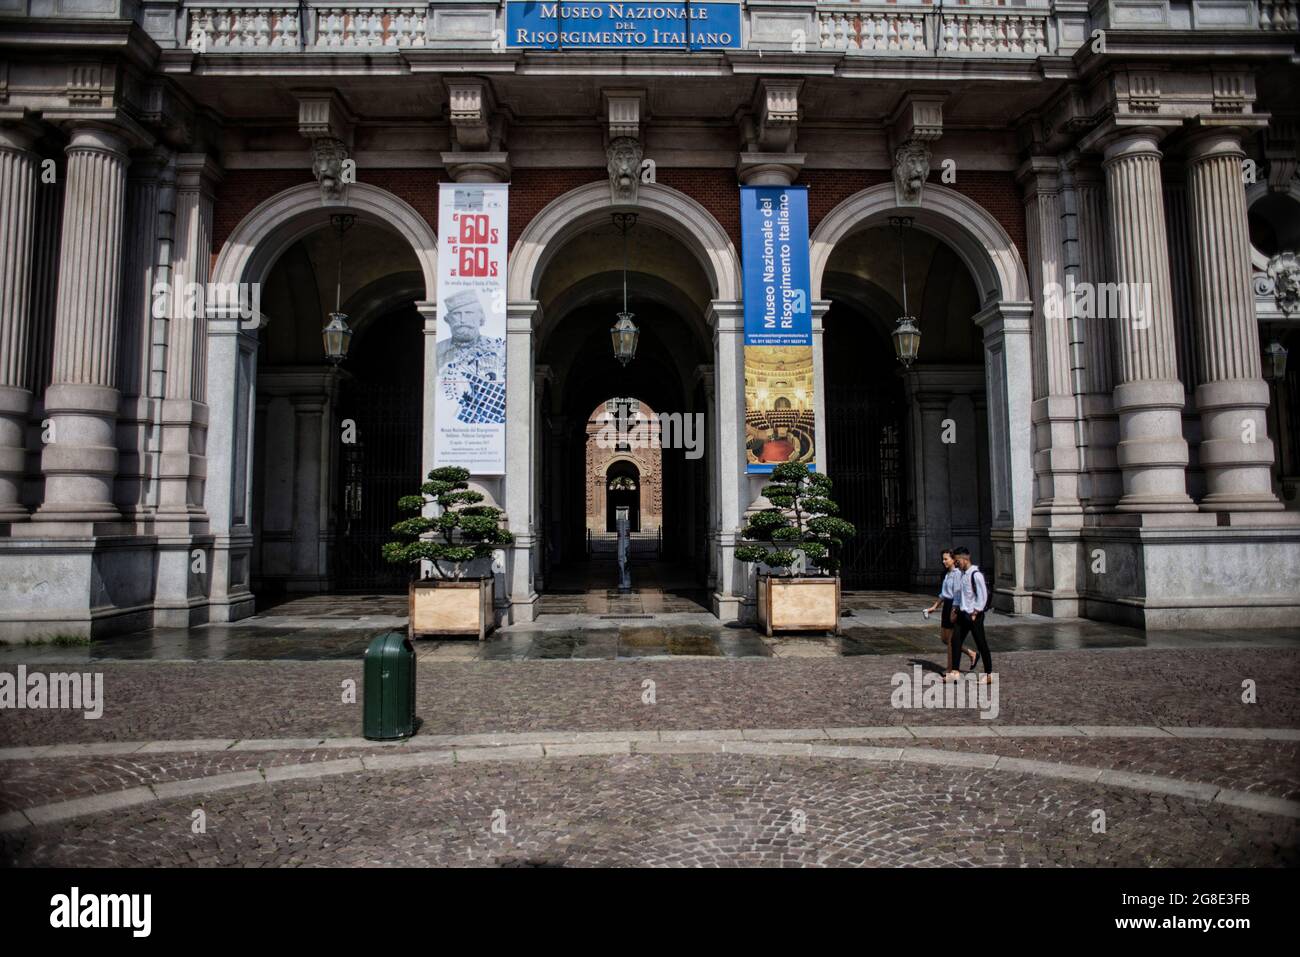 Europe - Italy, Torino: Front view of the Museo Nazionale del Risorgimento (The National Museum of the Italian Risorgimento) is the oldest and most fa Stock Photo